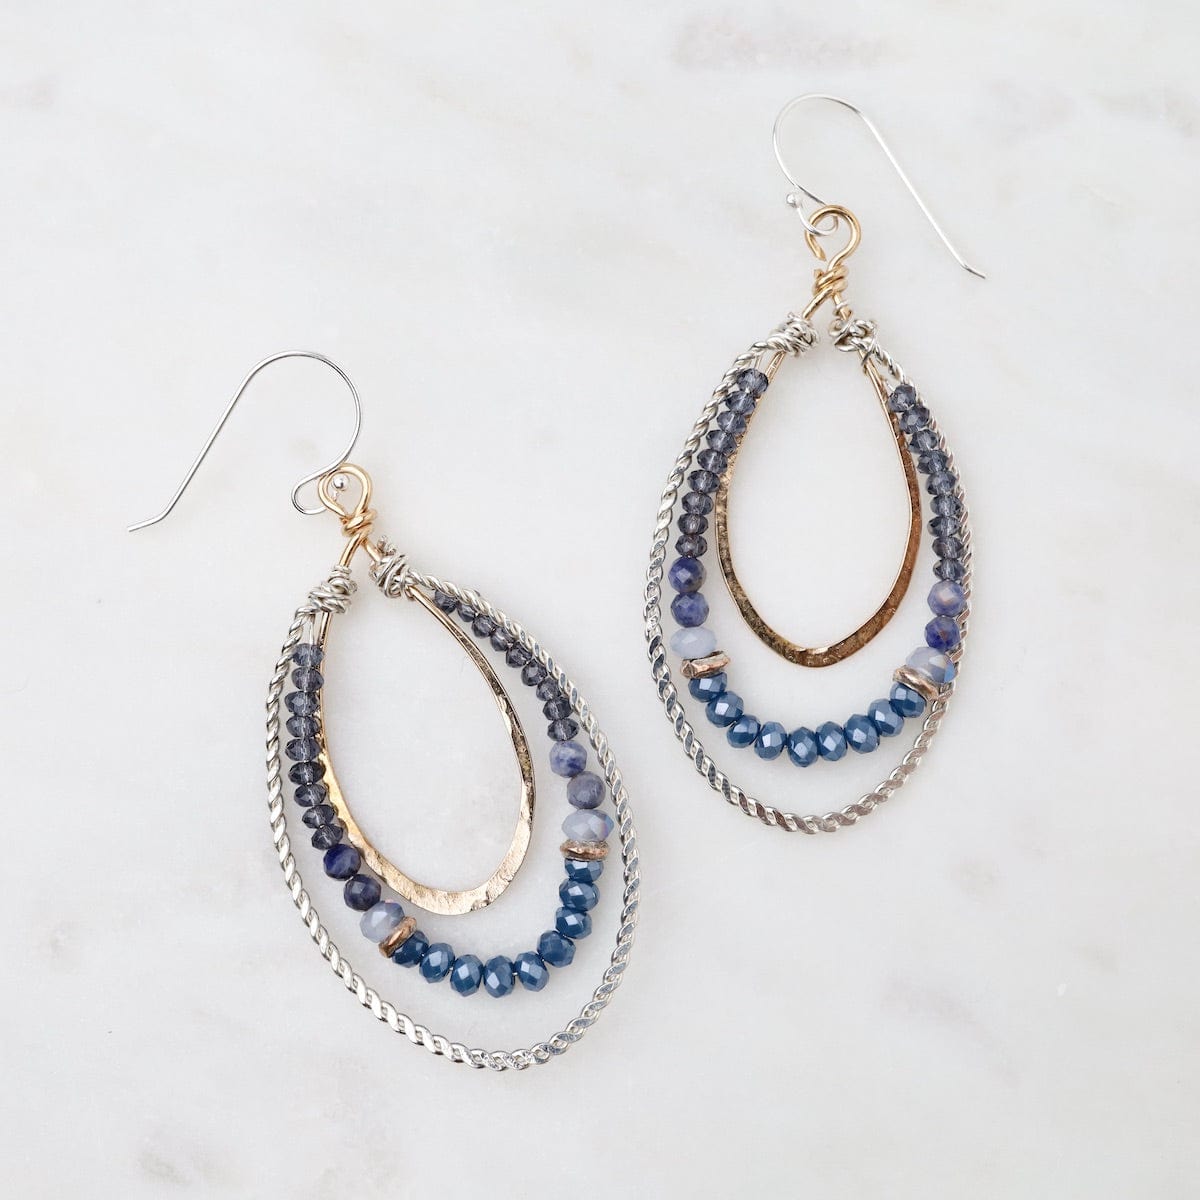 How To Make Wire Wrapped Drop Earrings - Running With Sisters